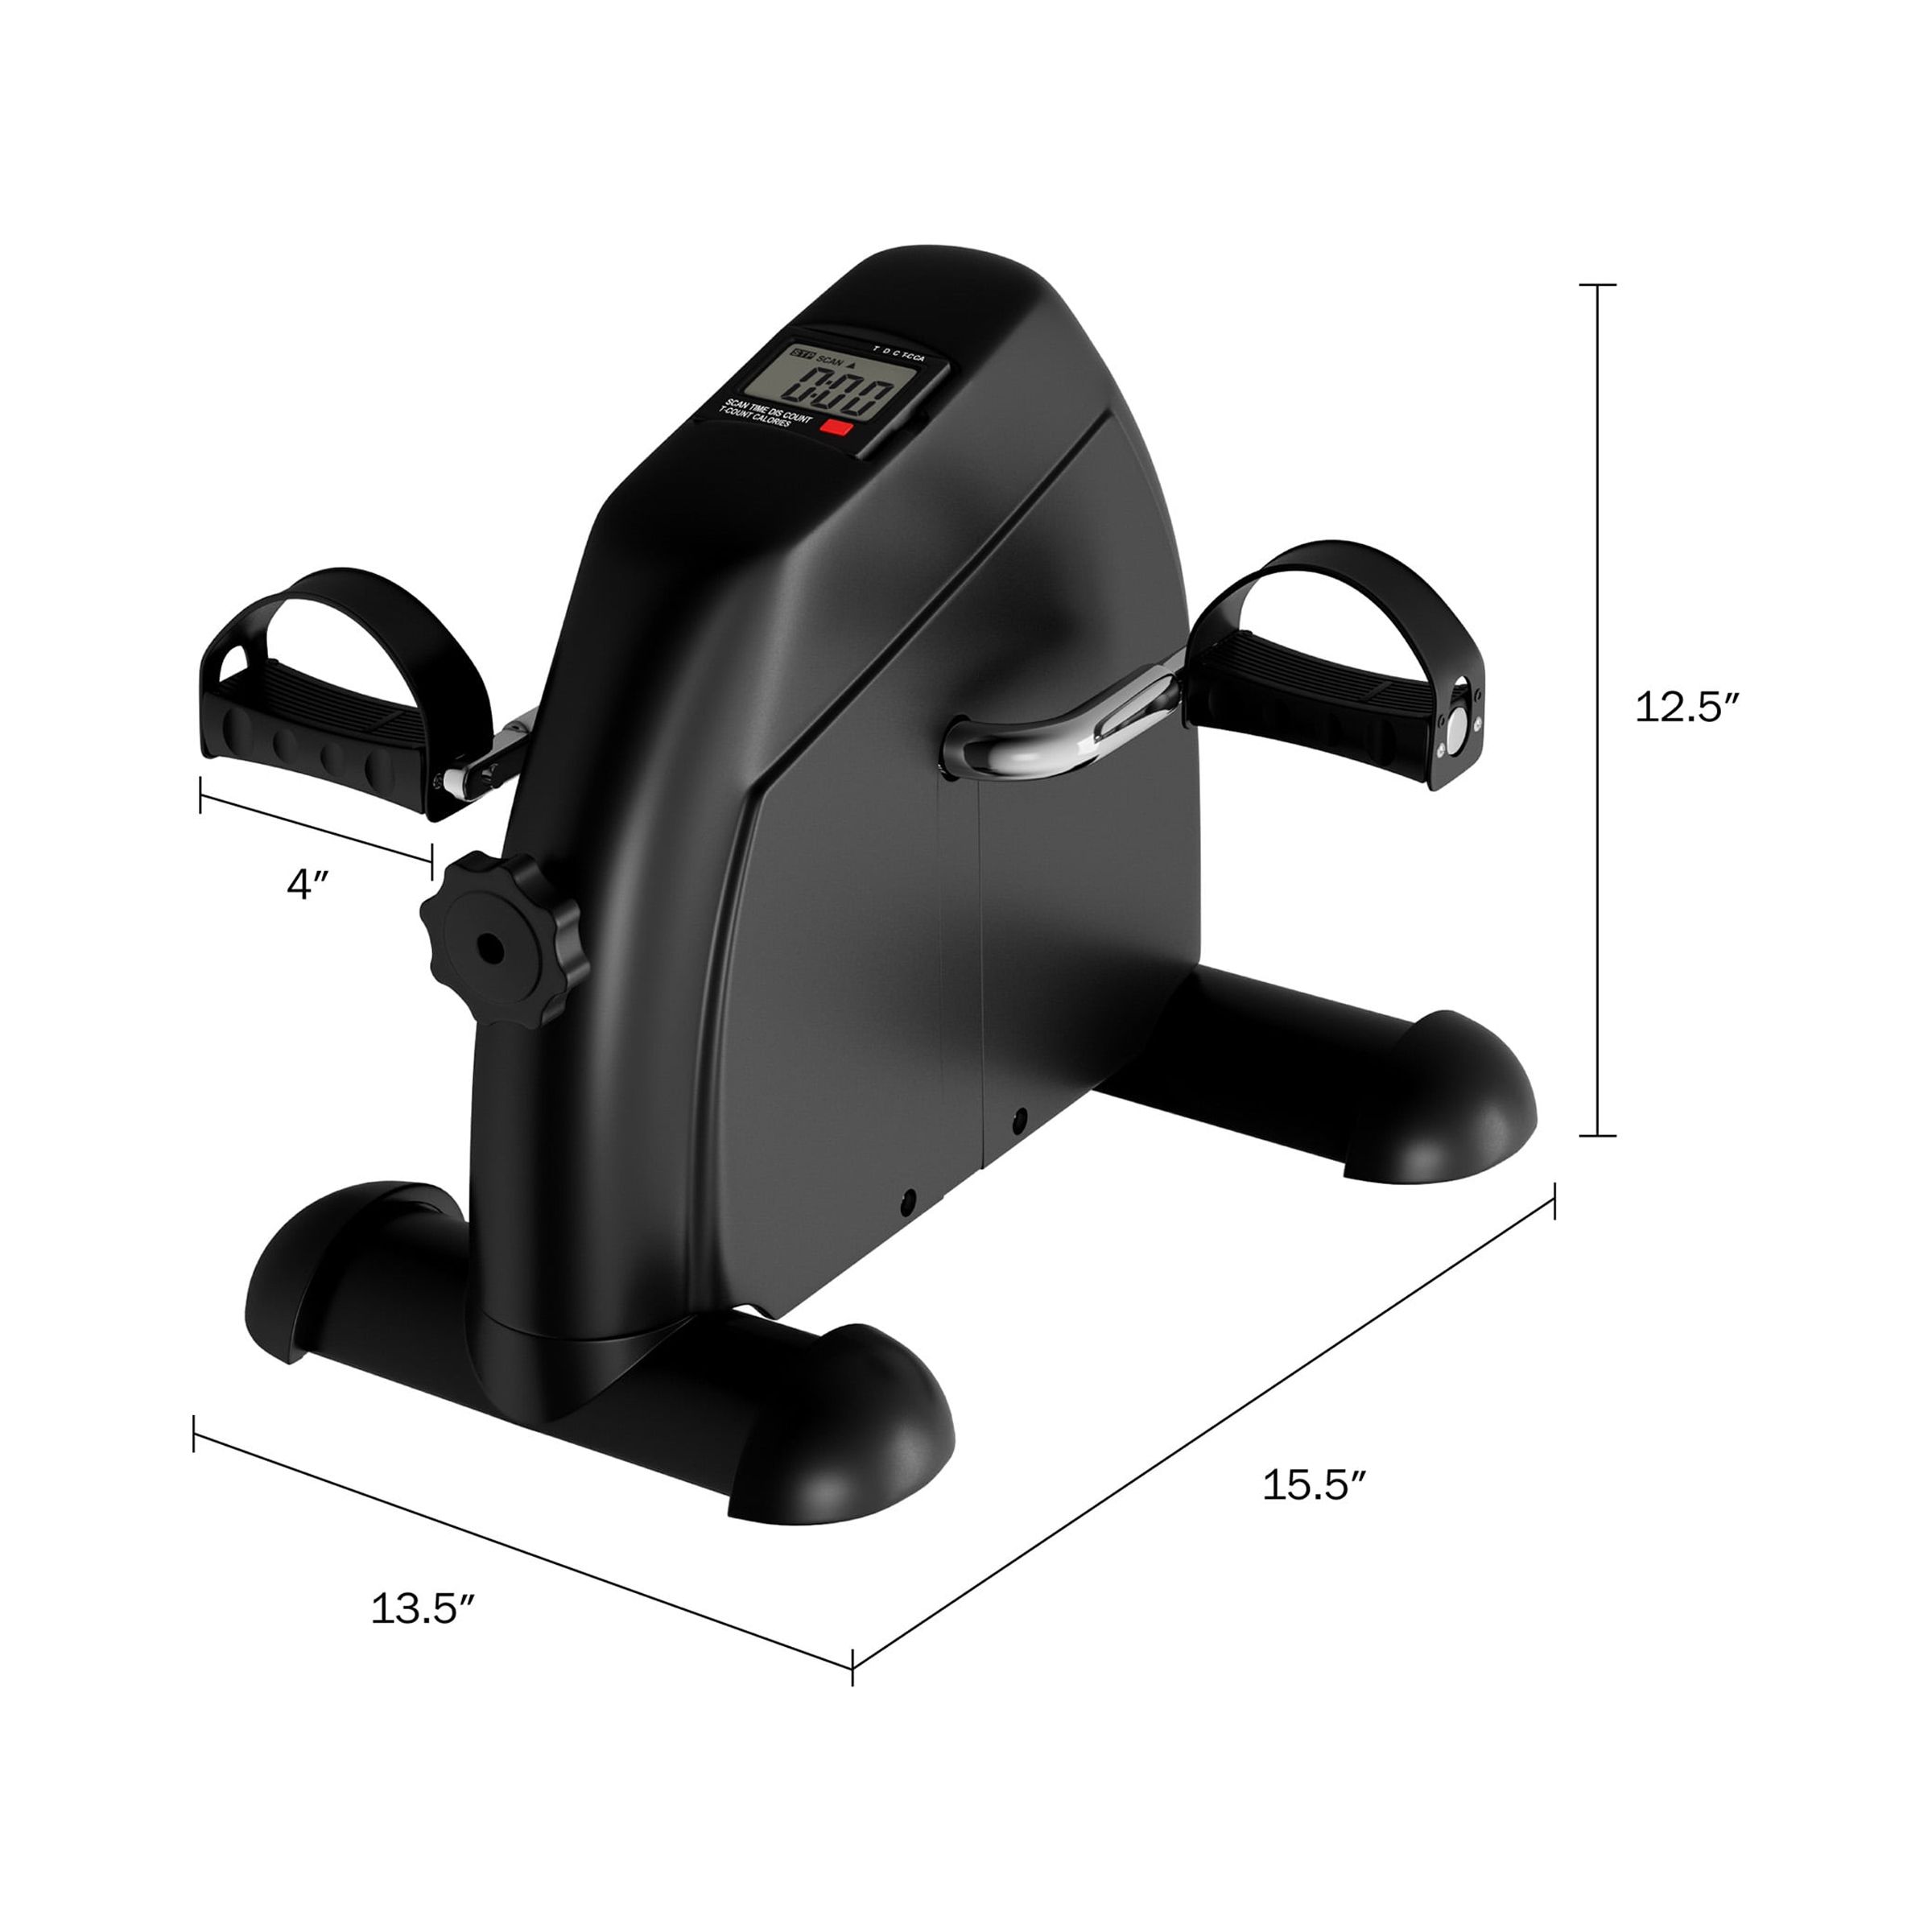 Wakeman Fitness Under Desk Bike and Pedal Exerciser with Calorie Counter - image 2 of 8